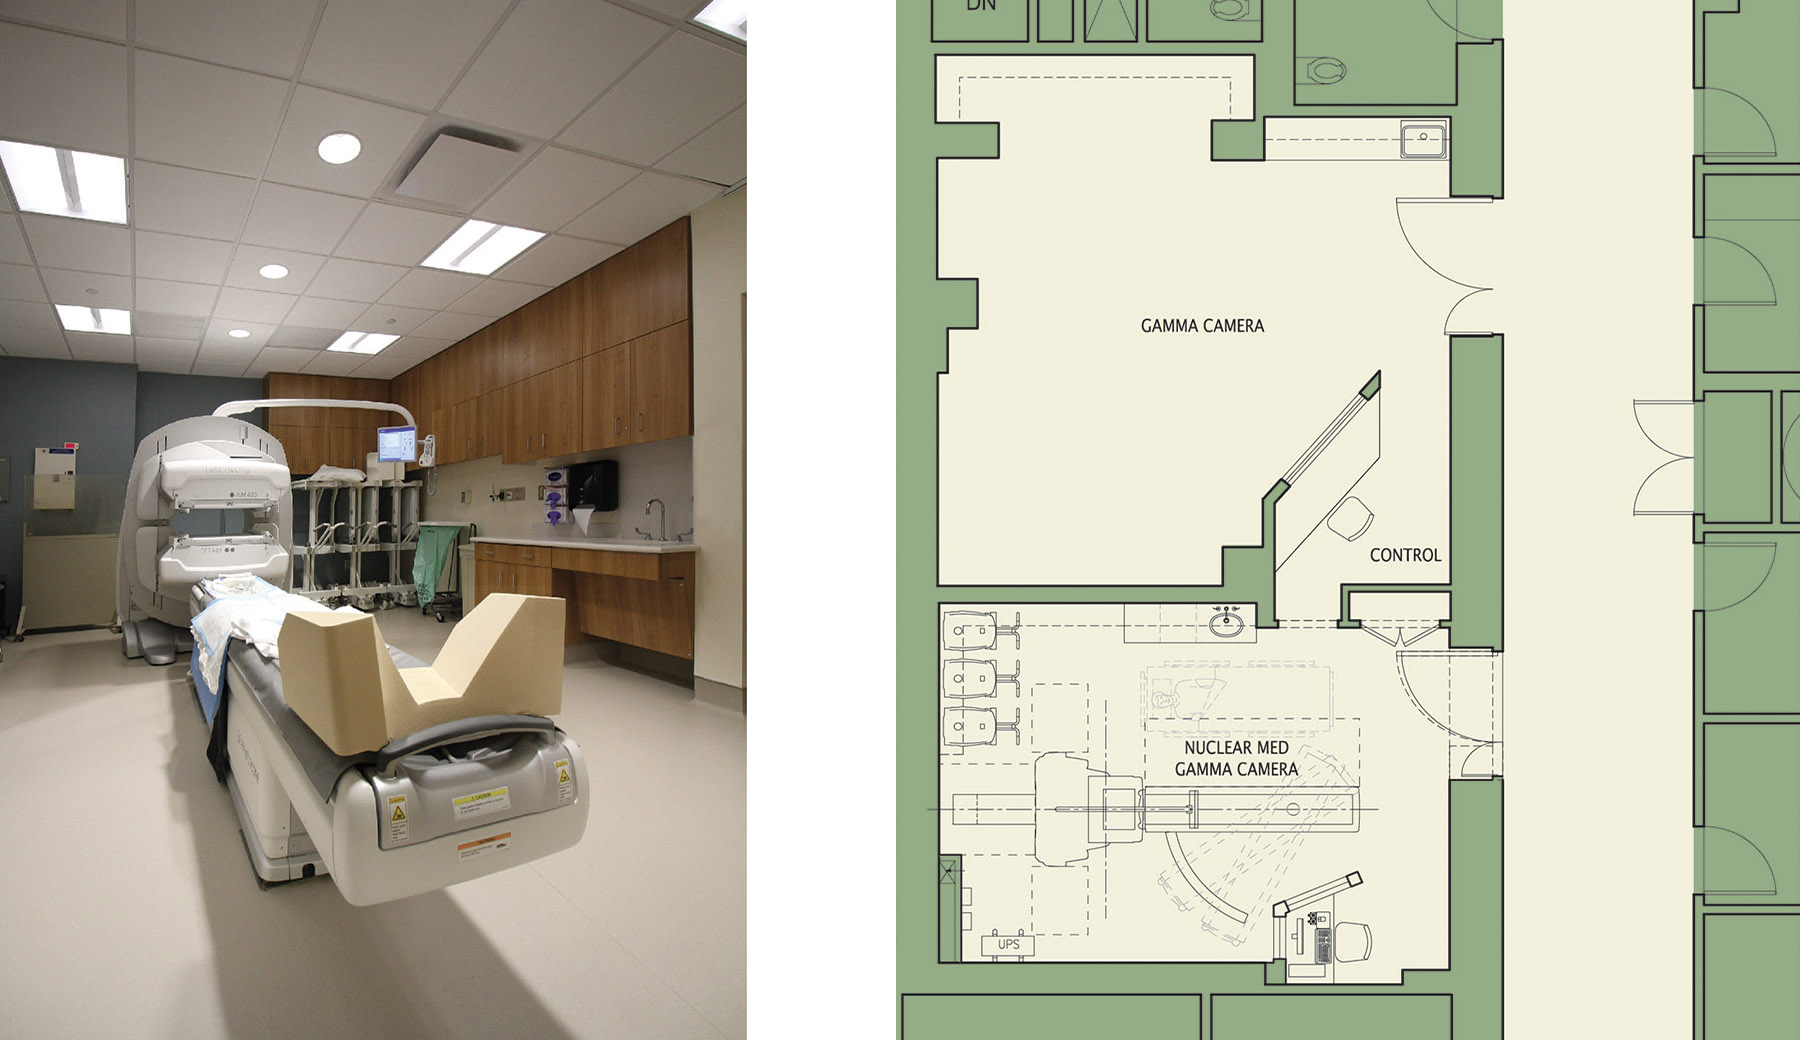 Lothrop Associates is part of the Westchester Medical Center’s ongoing equipment upgrades including the Nuclear Medicine Camera and Control alcove.